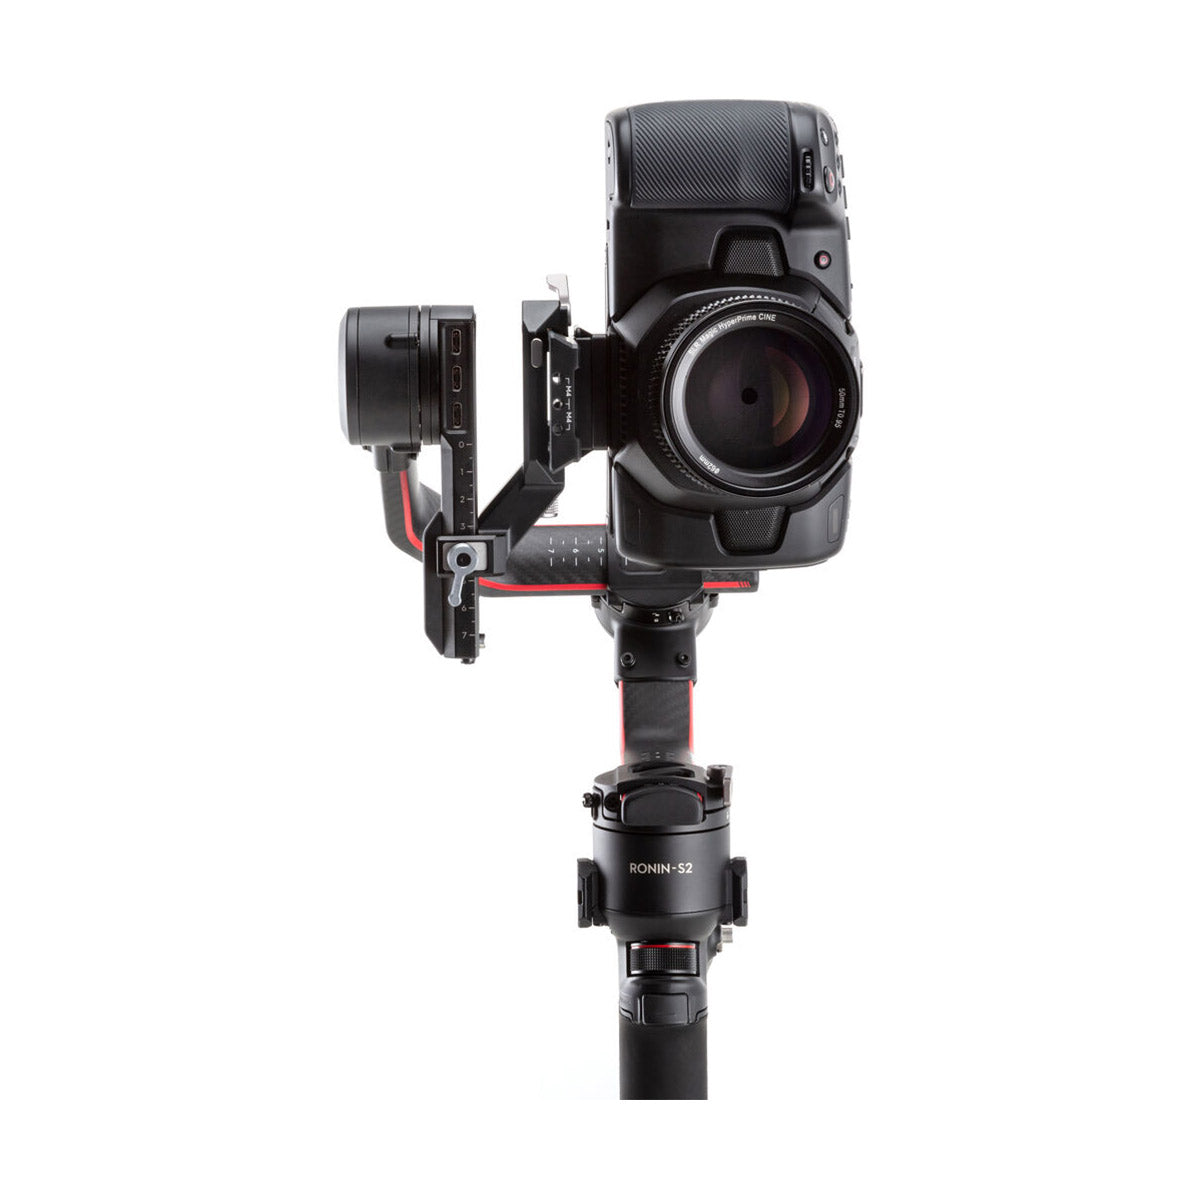 image_note gimbal and camera sold separately